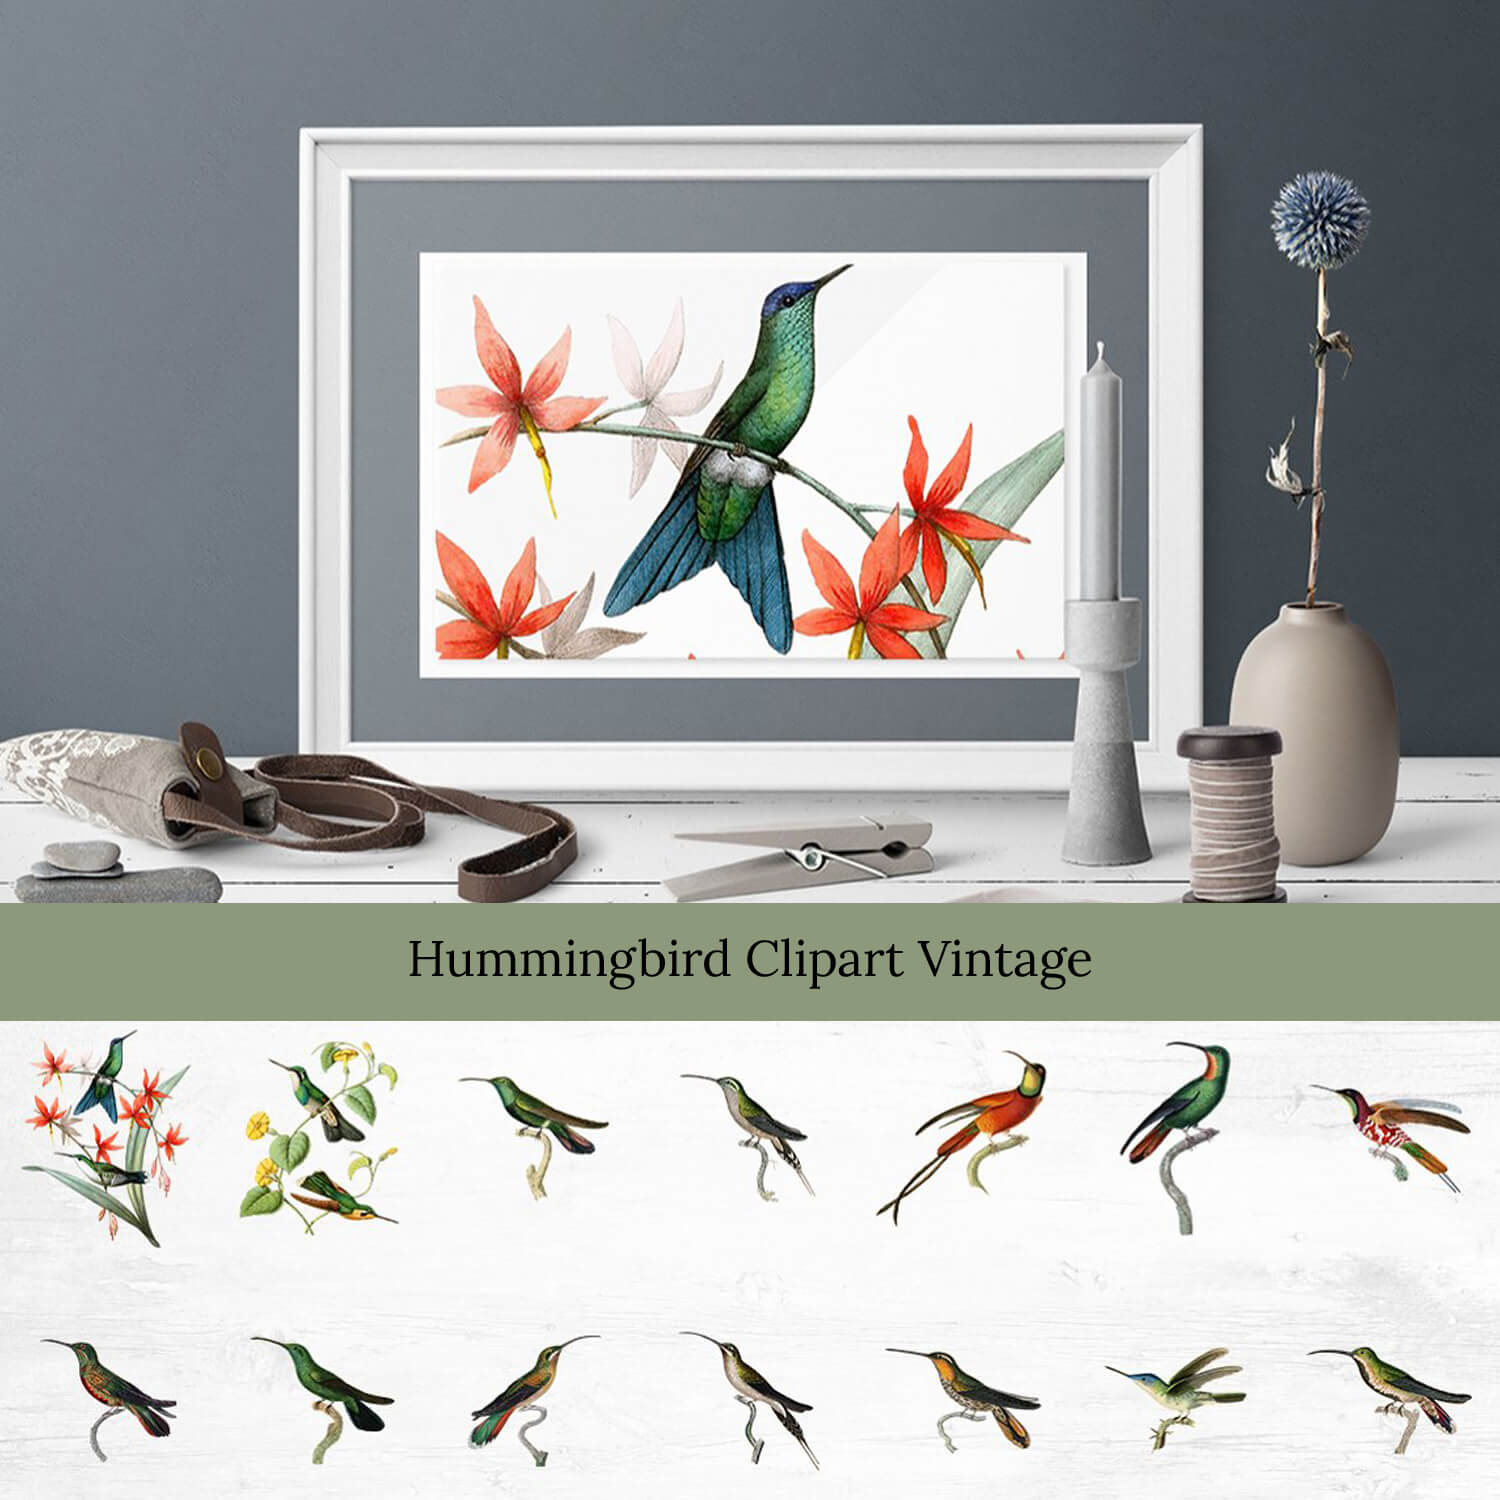 Hummingbird painting of incredible beauty in a room with gray walls.